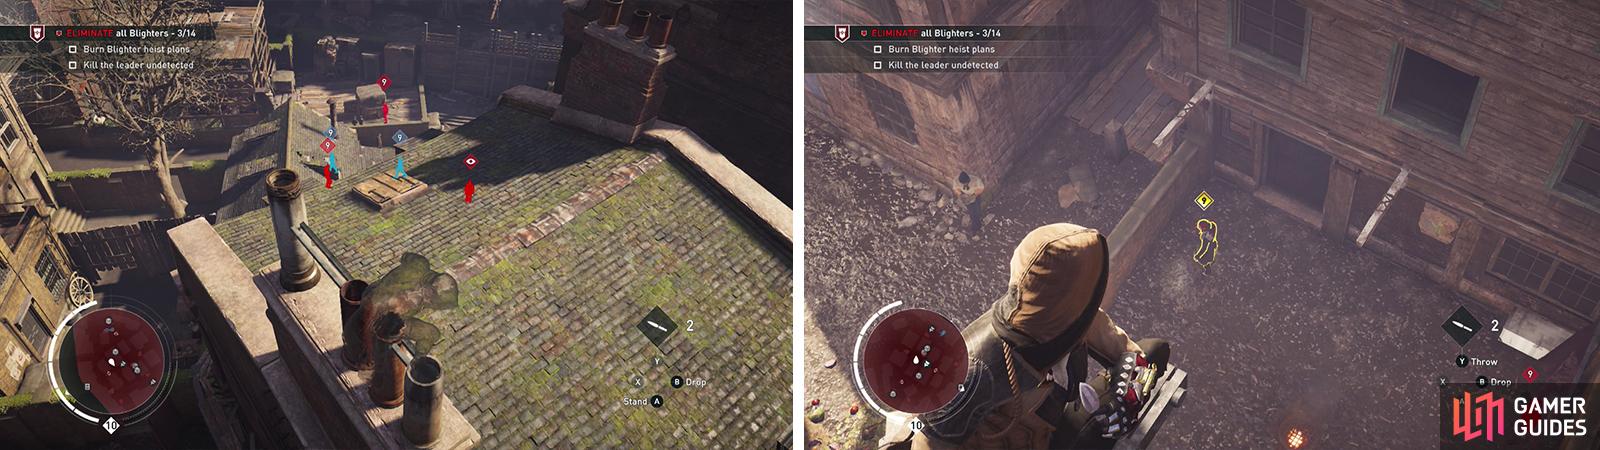 Tag the enemies using Eagle Vision from the rooftops (left). Use knives or an air assassination to kill the Leader undetected (right).